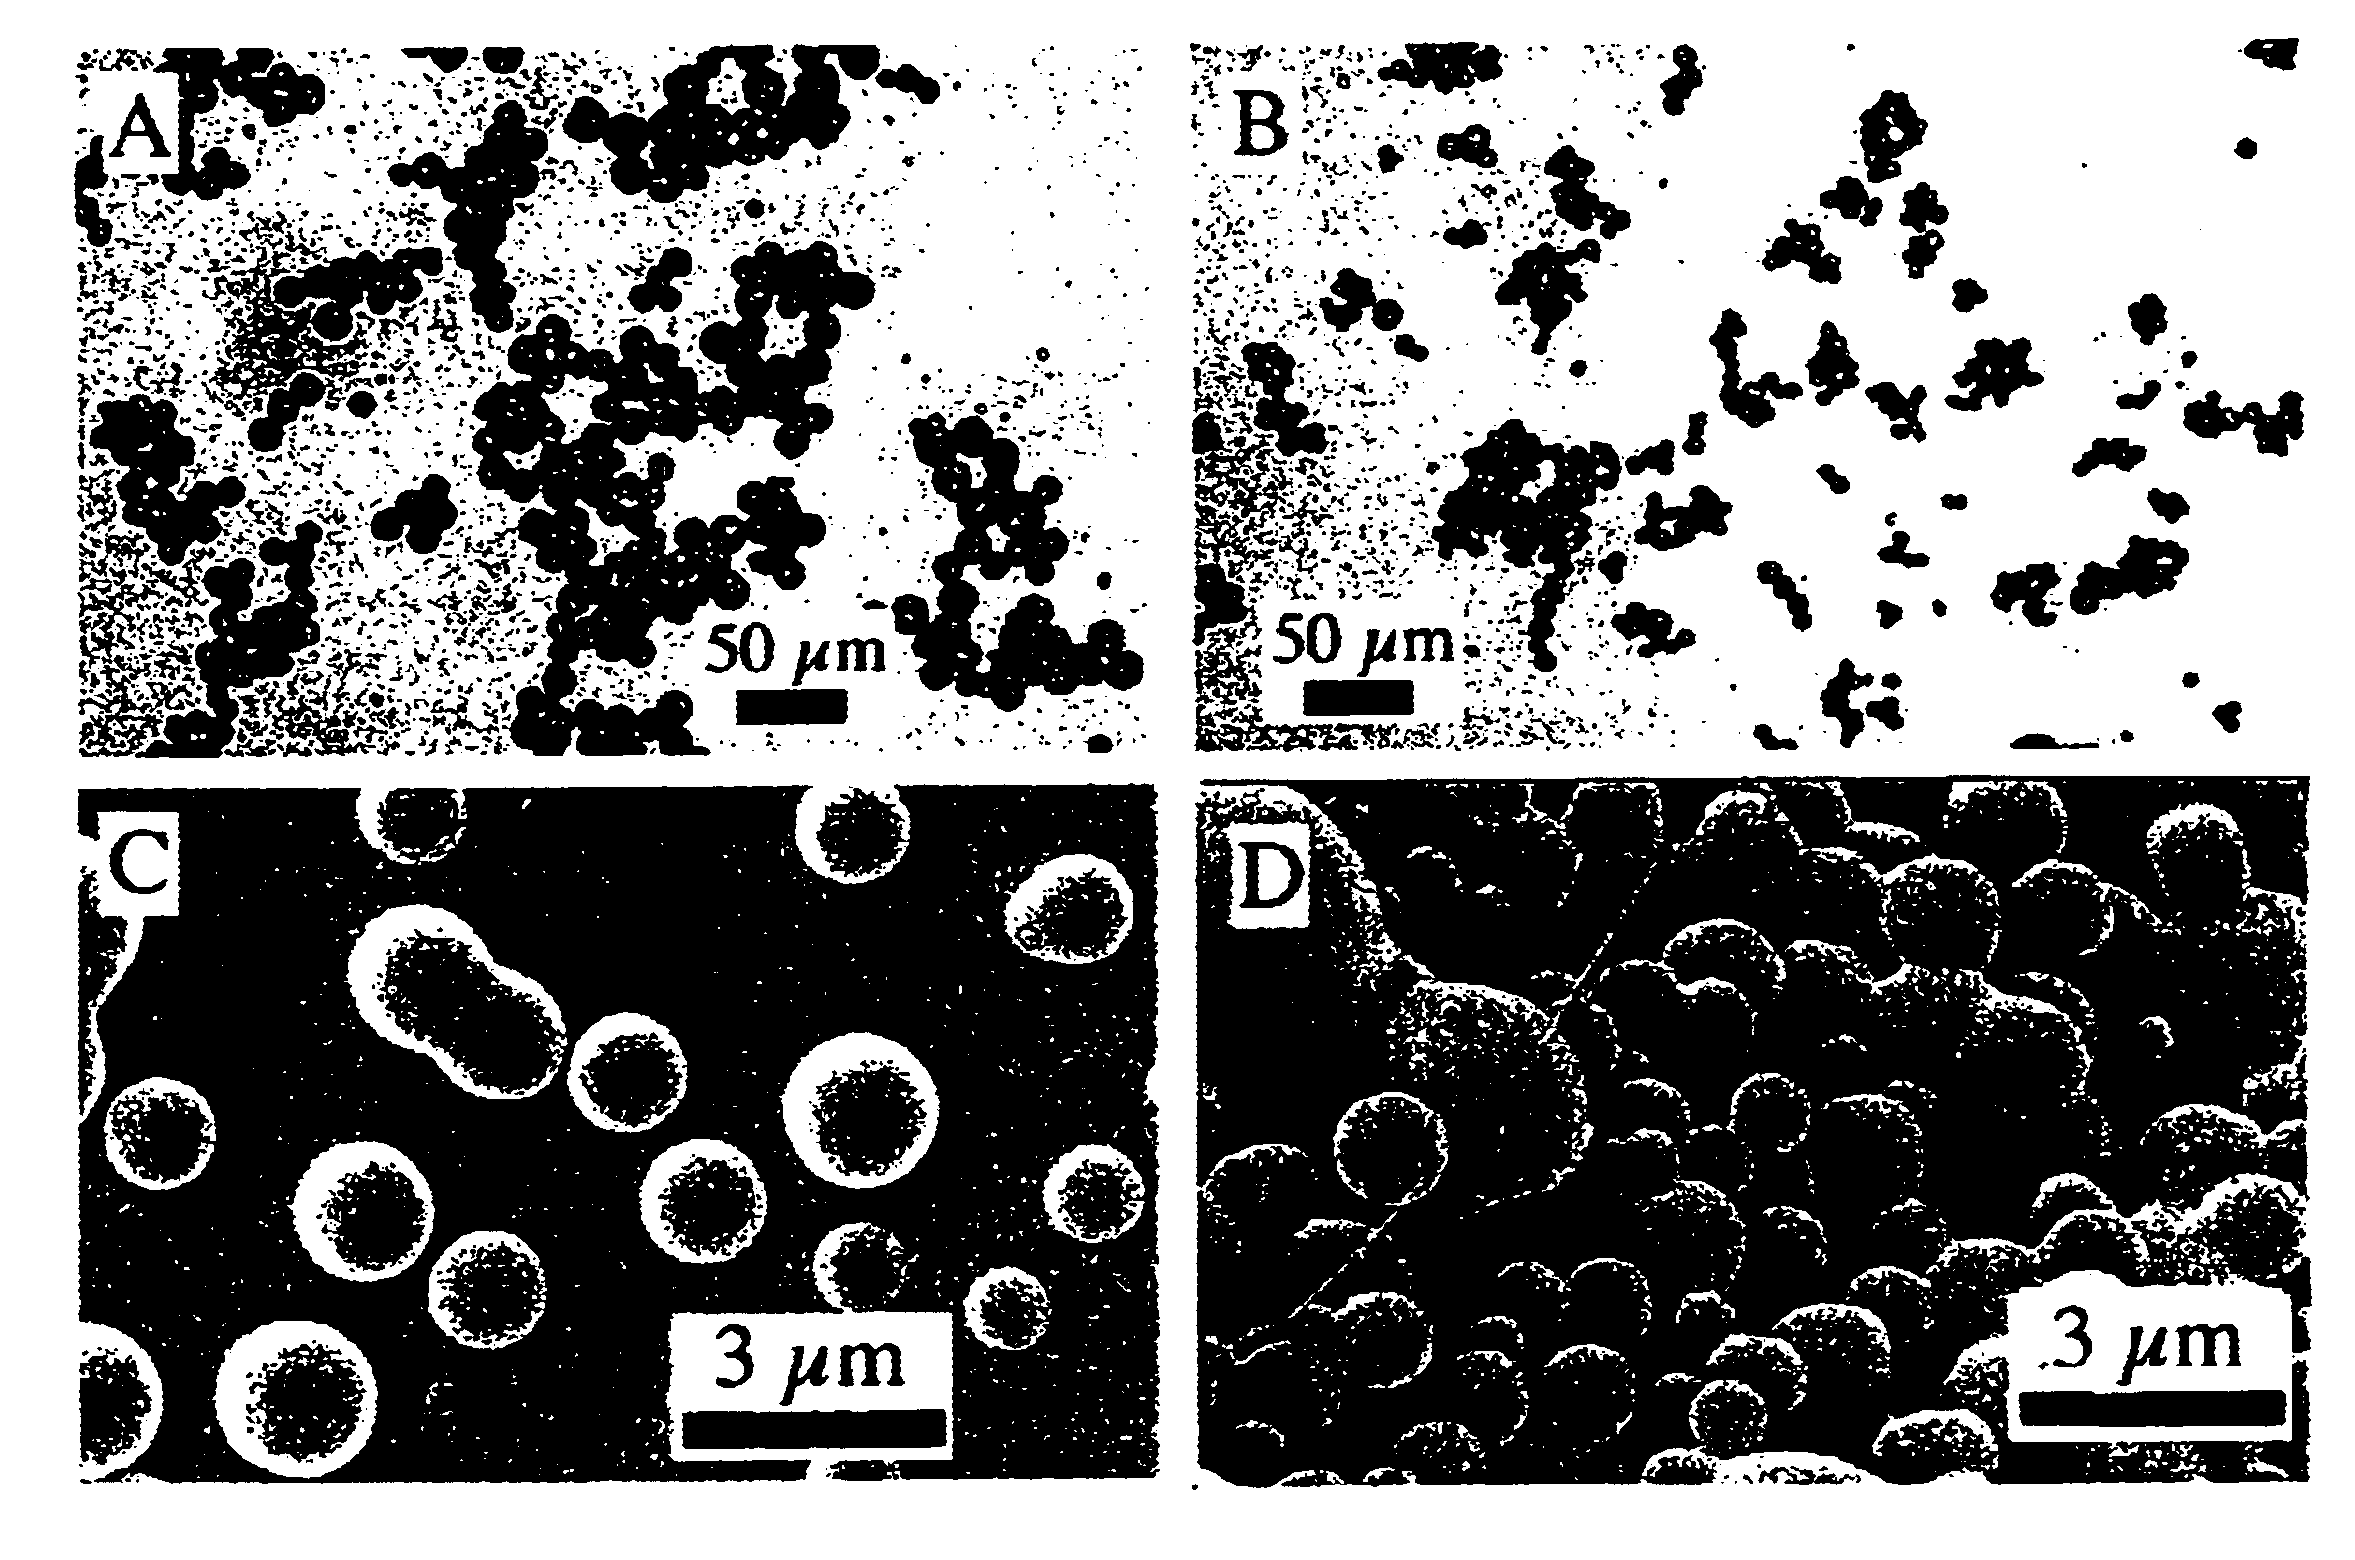 Microparticles